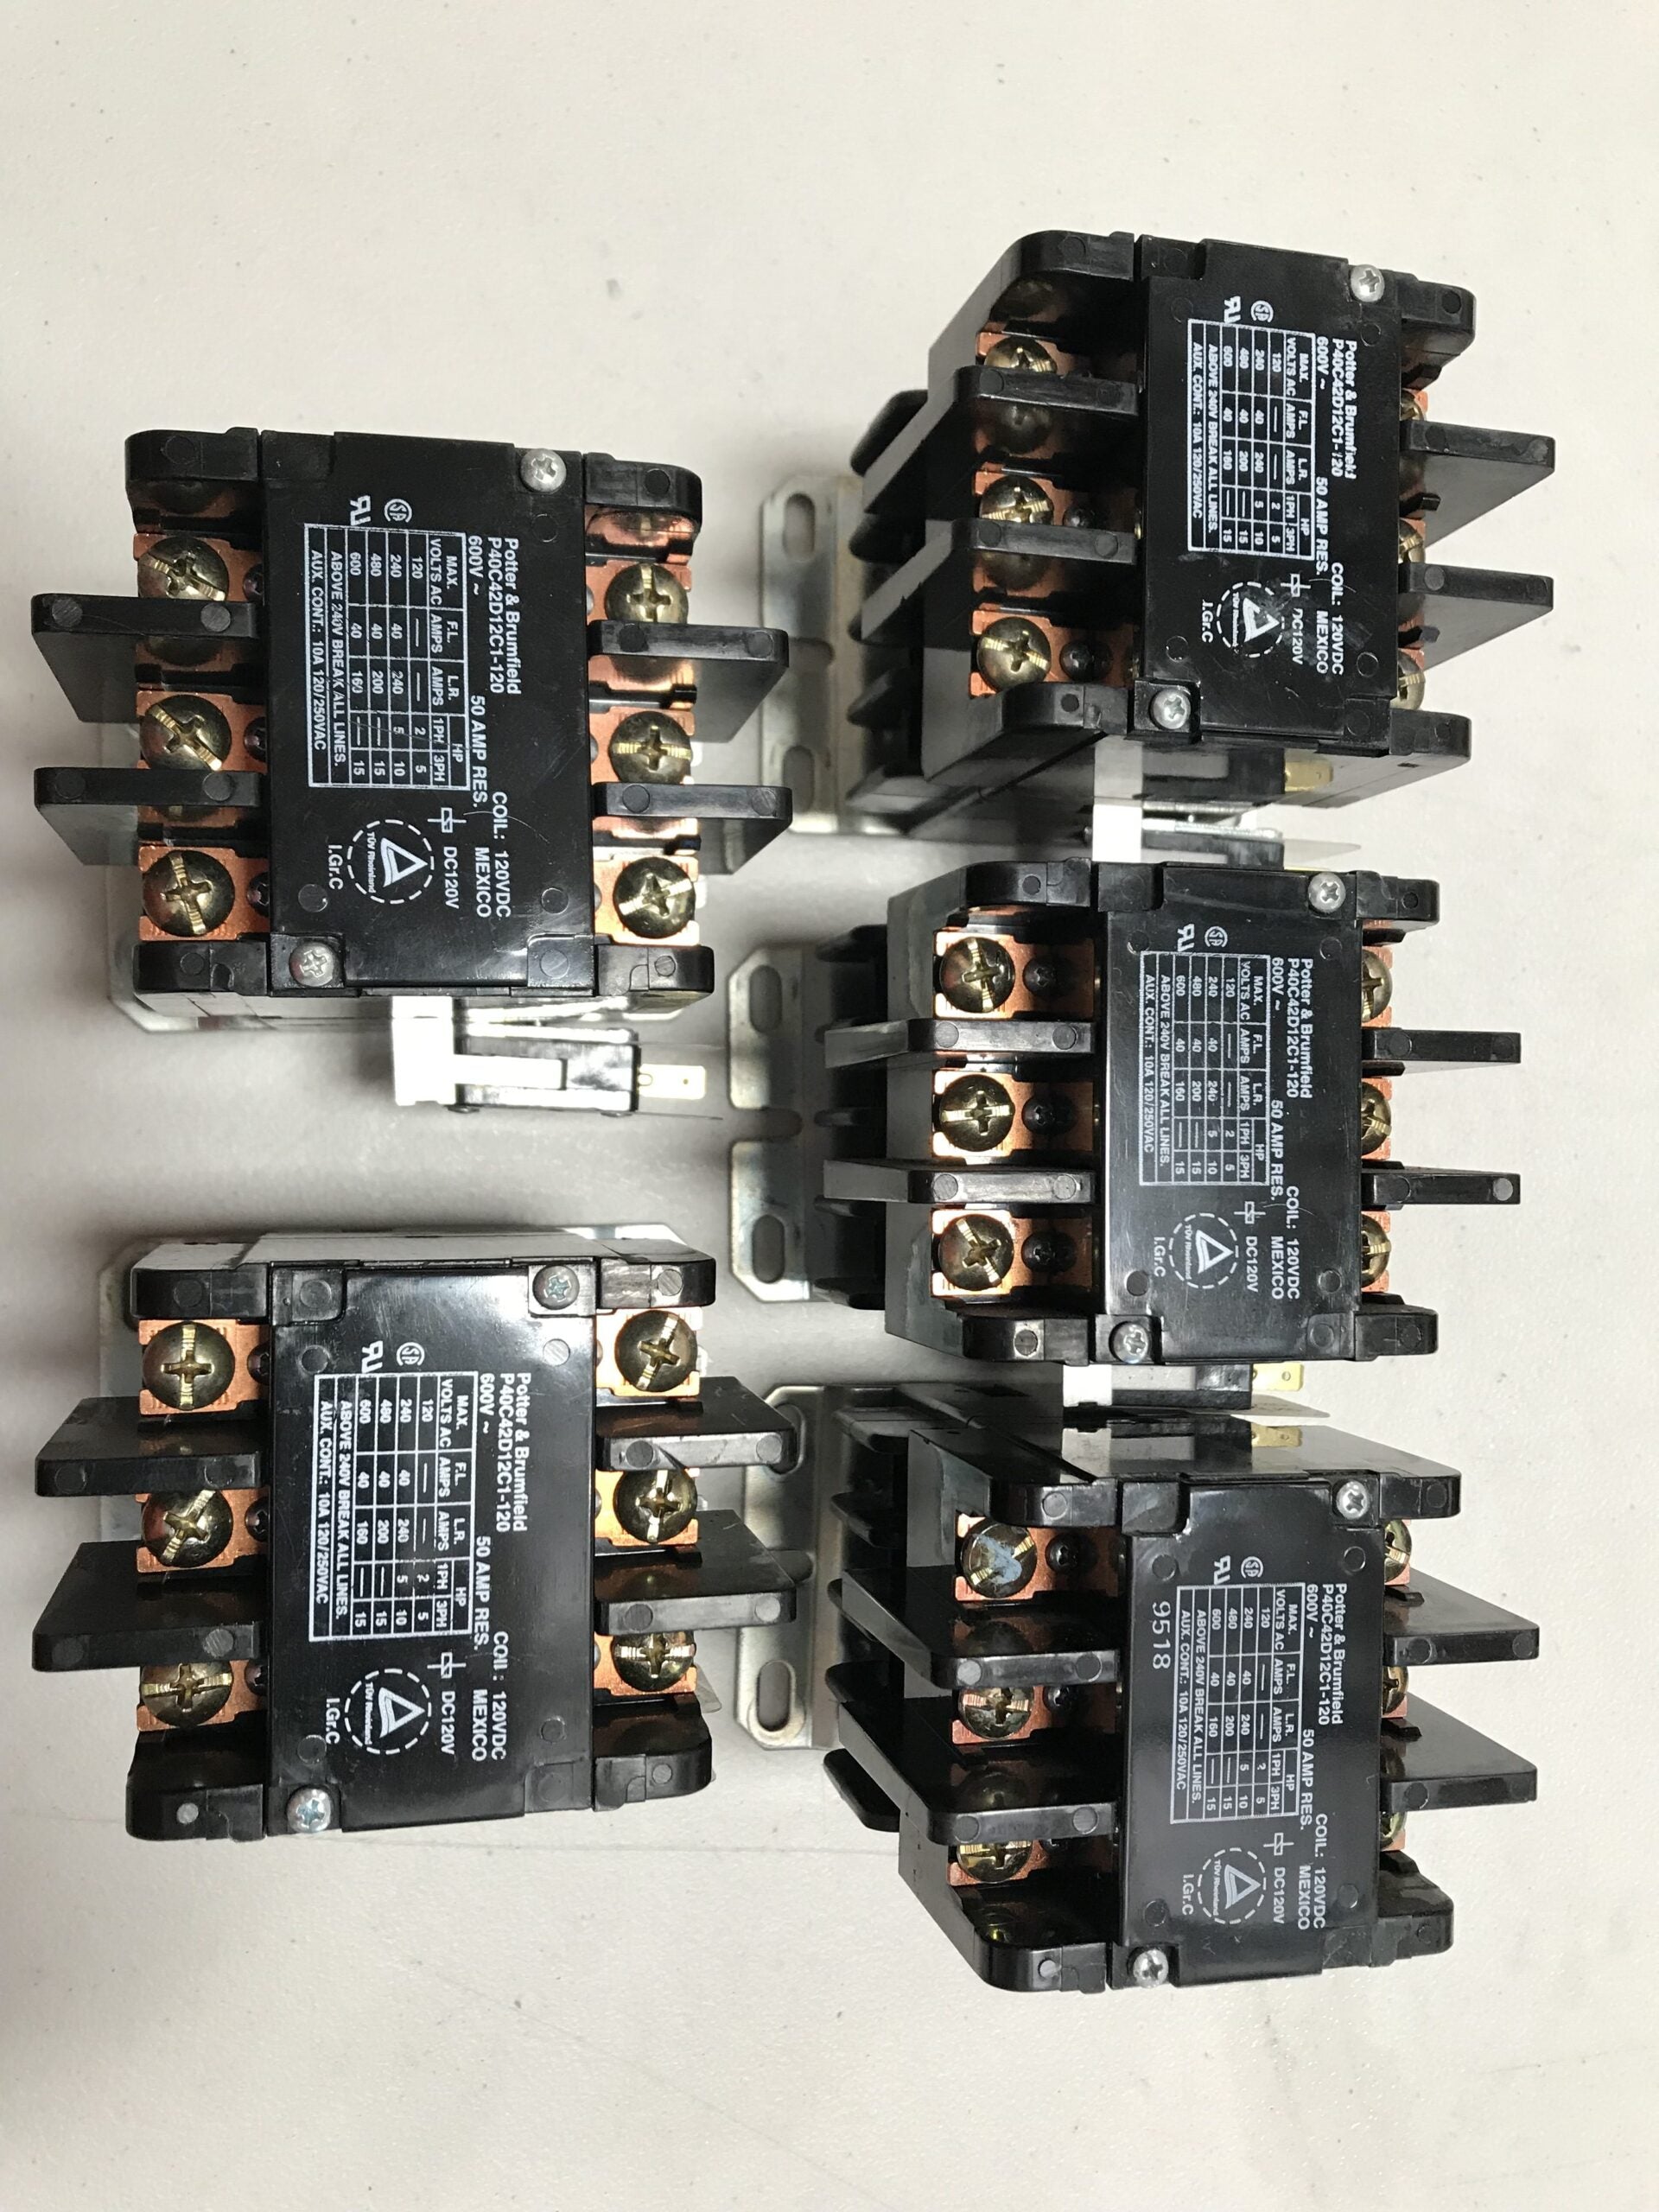 P40C42D12C1-120 CONTACTOR (POTTER AND BRUMFIELD)